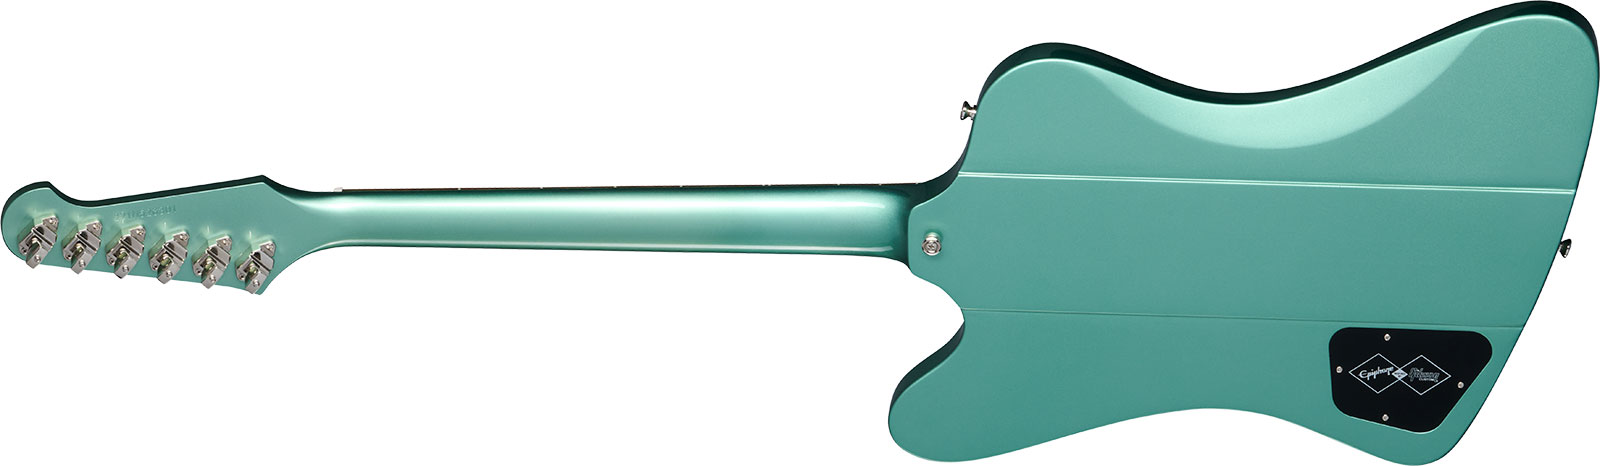 Epiphone Firebird I 1963 Inspired By Gibson Custom 1mh Ht Lau - Inverness Green - Guitare Électrique RÉtro Rock - Variation 1